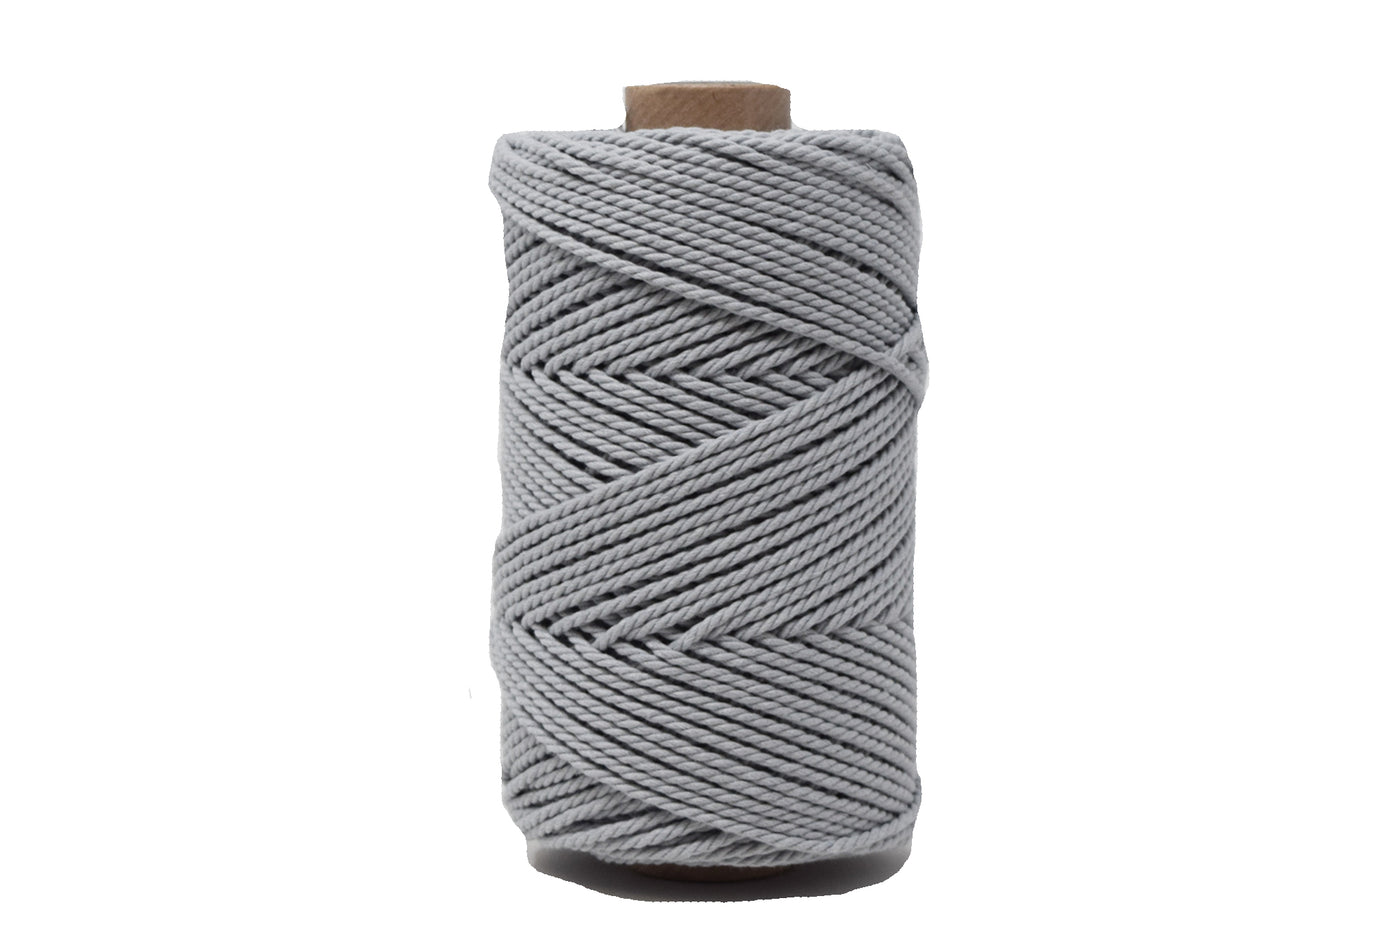 COTTON ROPE ZERO WASTE 2 MM - 3 PLY - SOFT GRAY COLOR